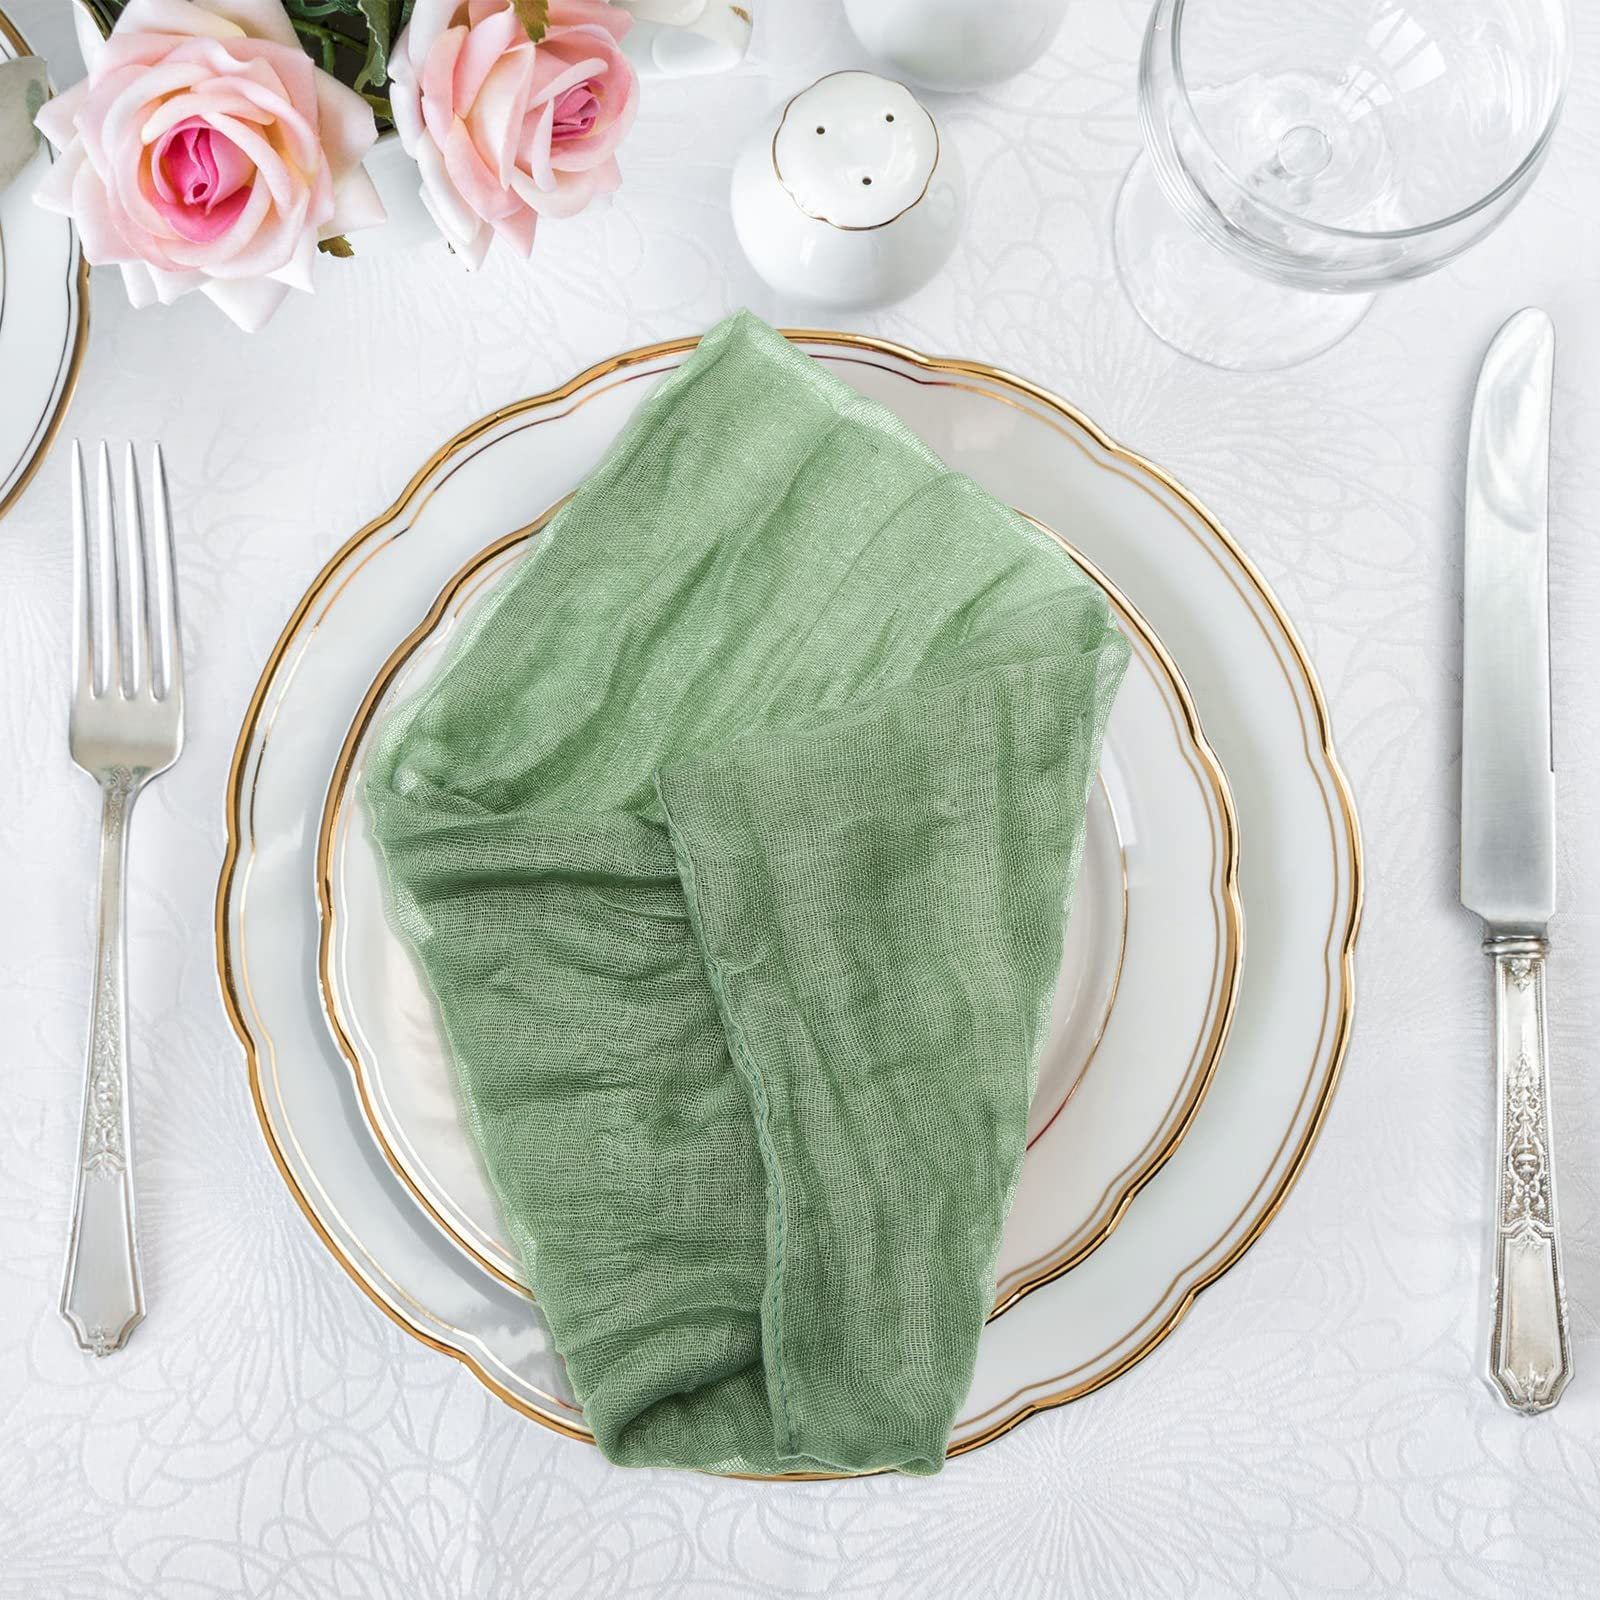 Bulk 12 PCS Cheesecloth Napkins Boho Rustic Cloth Table Napkins for Restaurant Weddings Party Dinner Decoration Wholesale